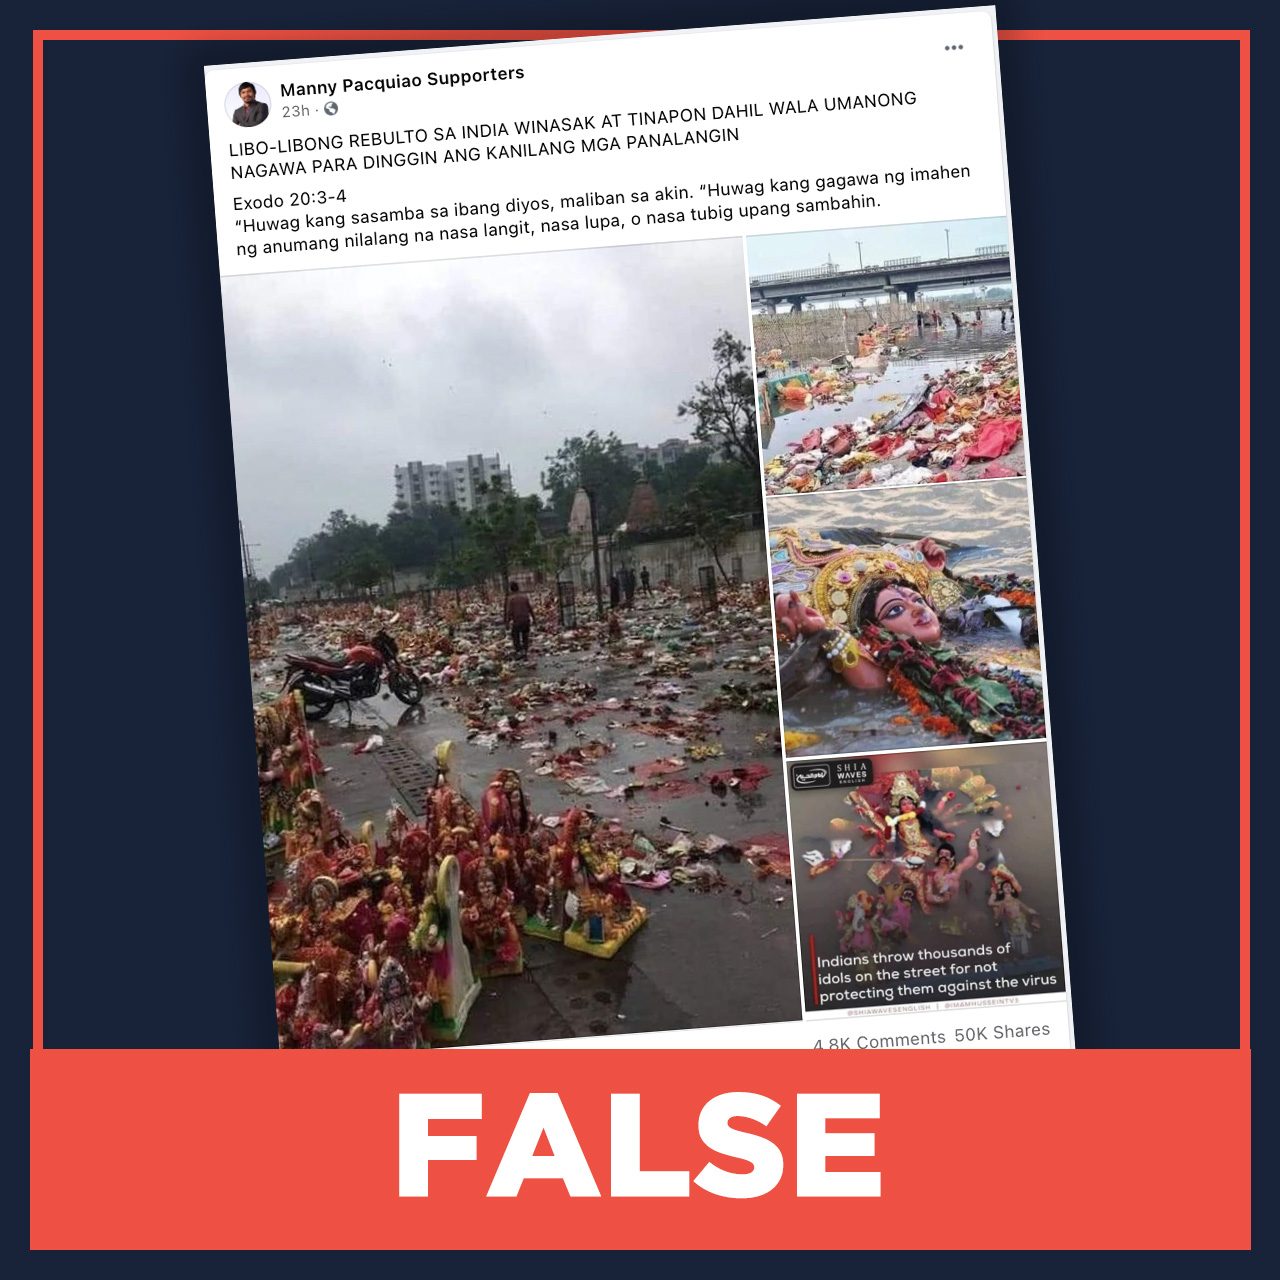 FALSE: Photos of religious statues discarded in India due to COVID-19 crisis